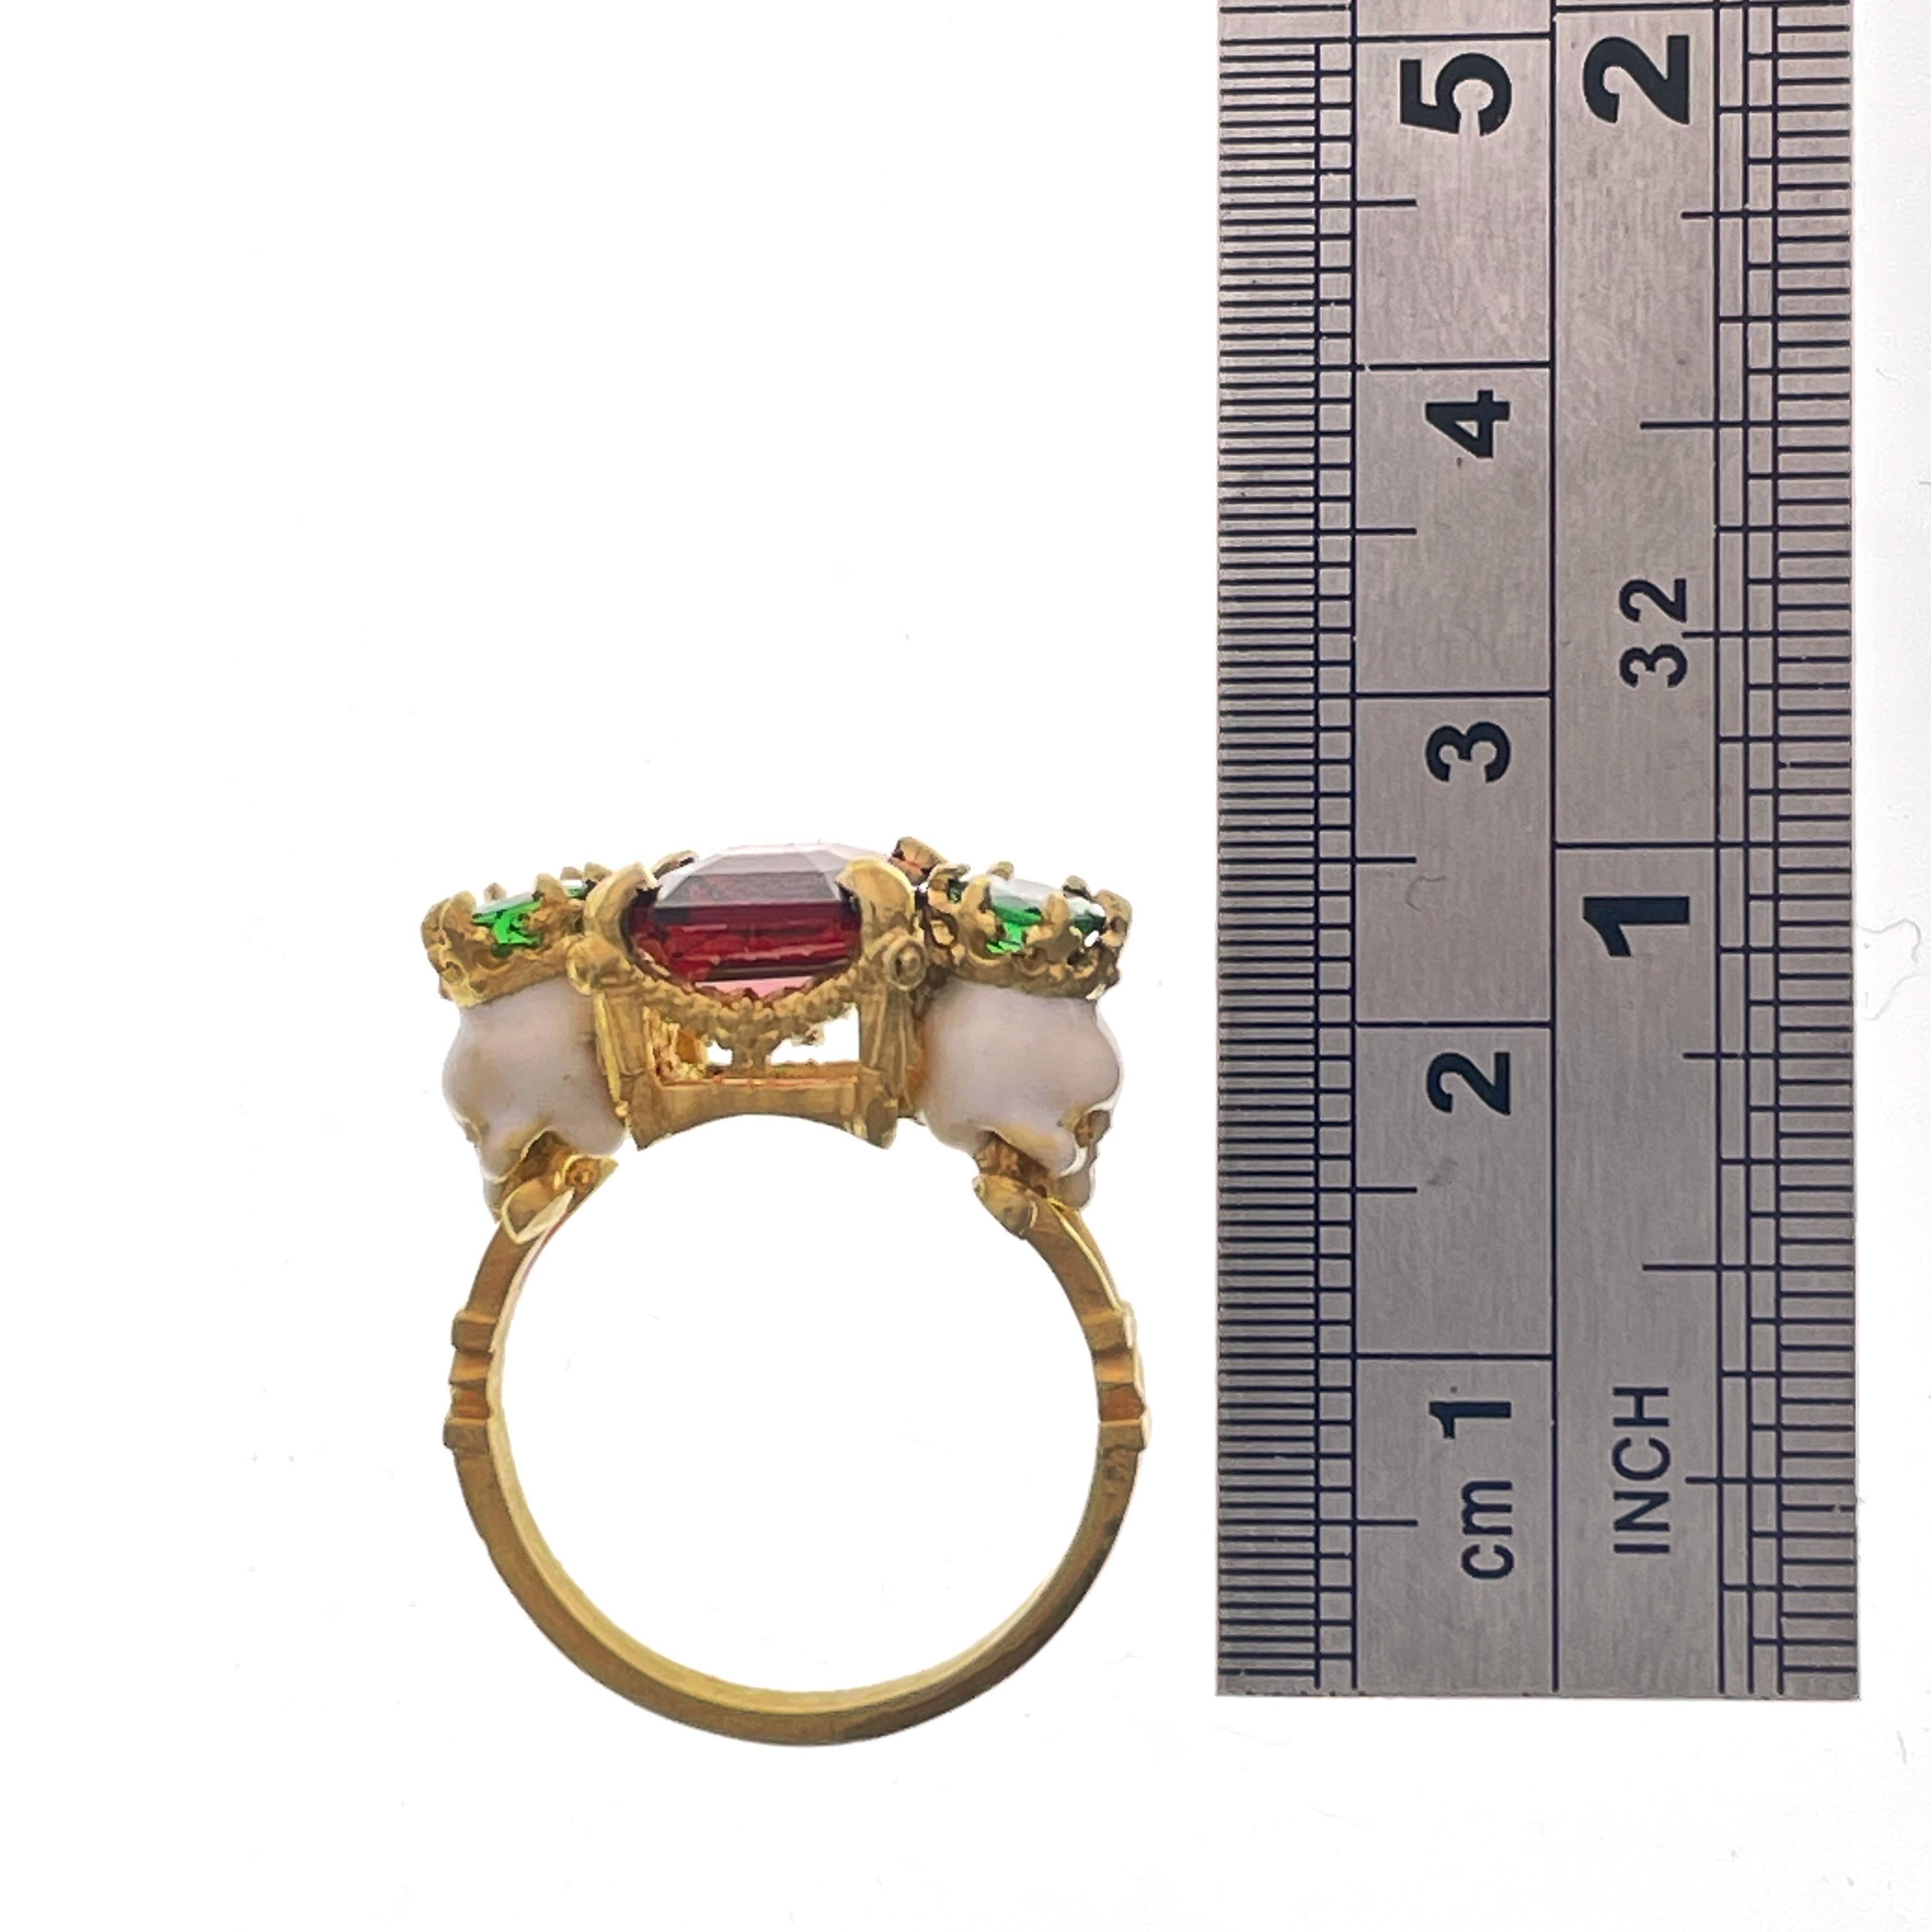 Catacomb Saints Garland Ring in 22 Karat Gold with Red and Tsavorite Garnets 13